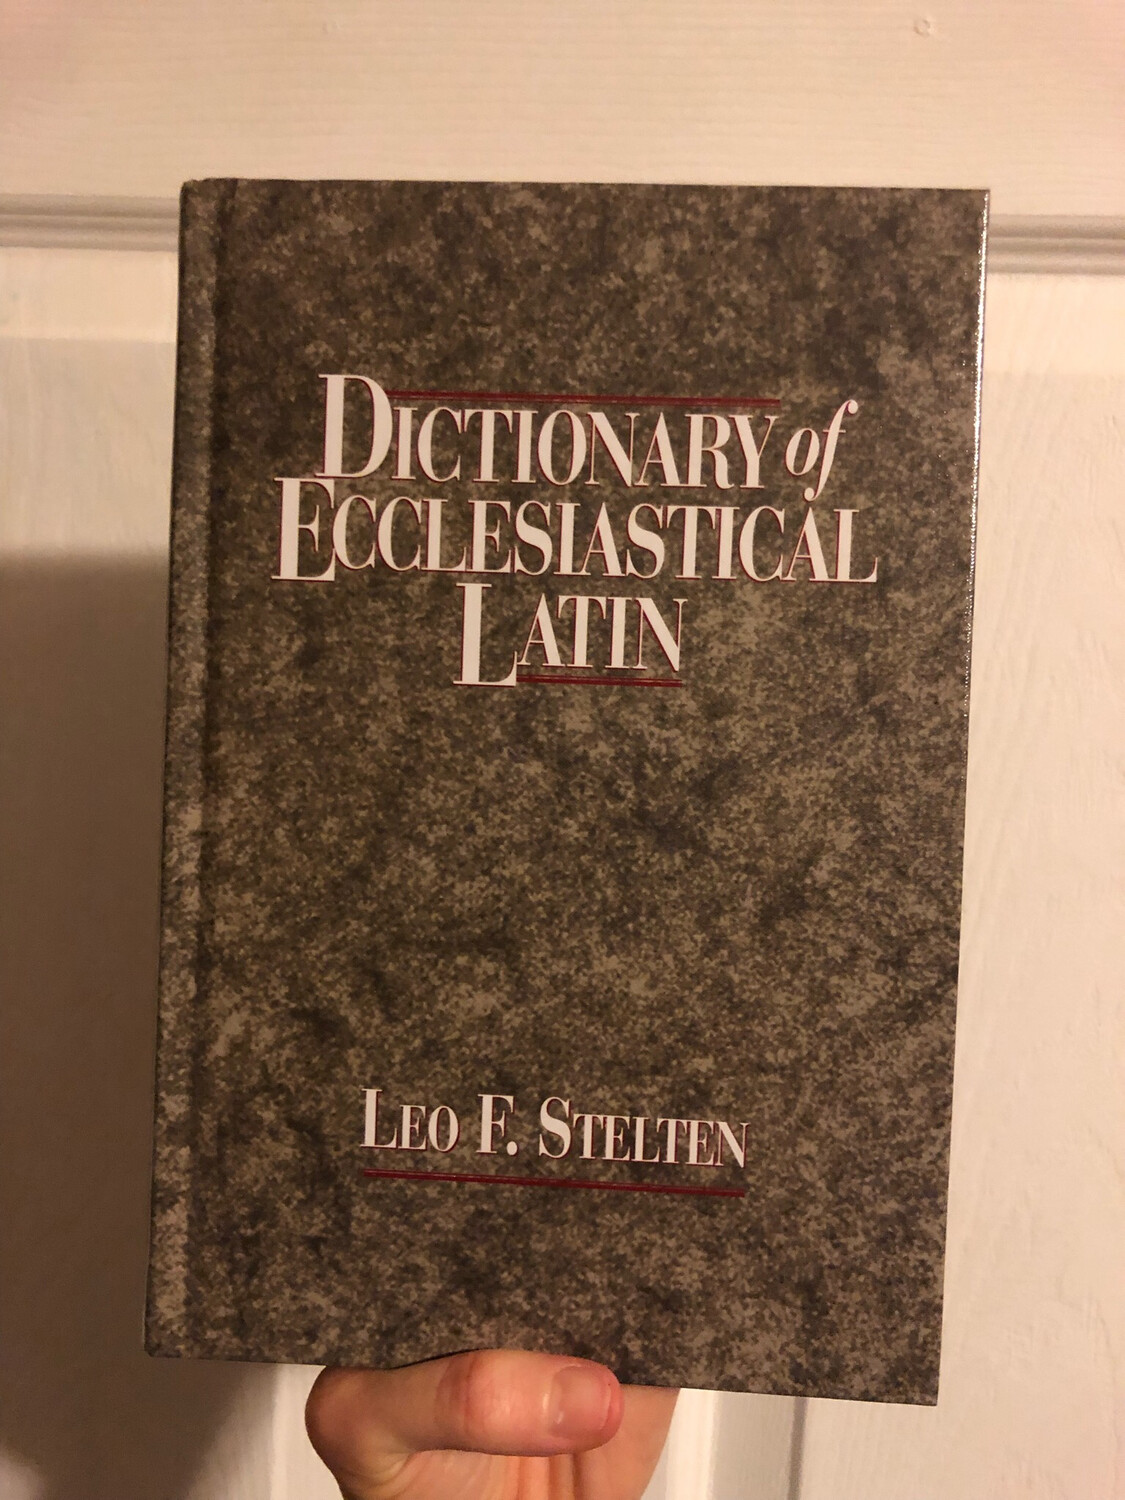 Dictionary of Ecclesiastical Latin by Leo F Steltin